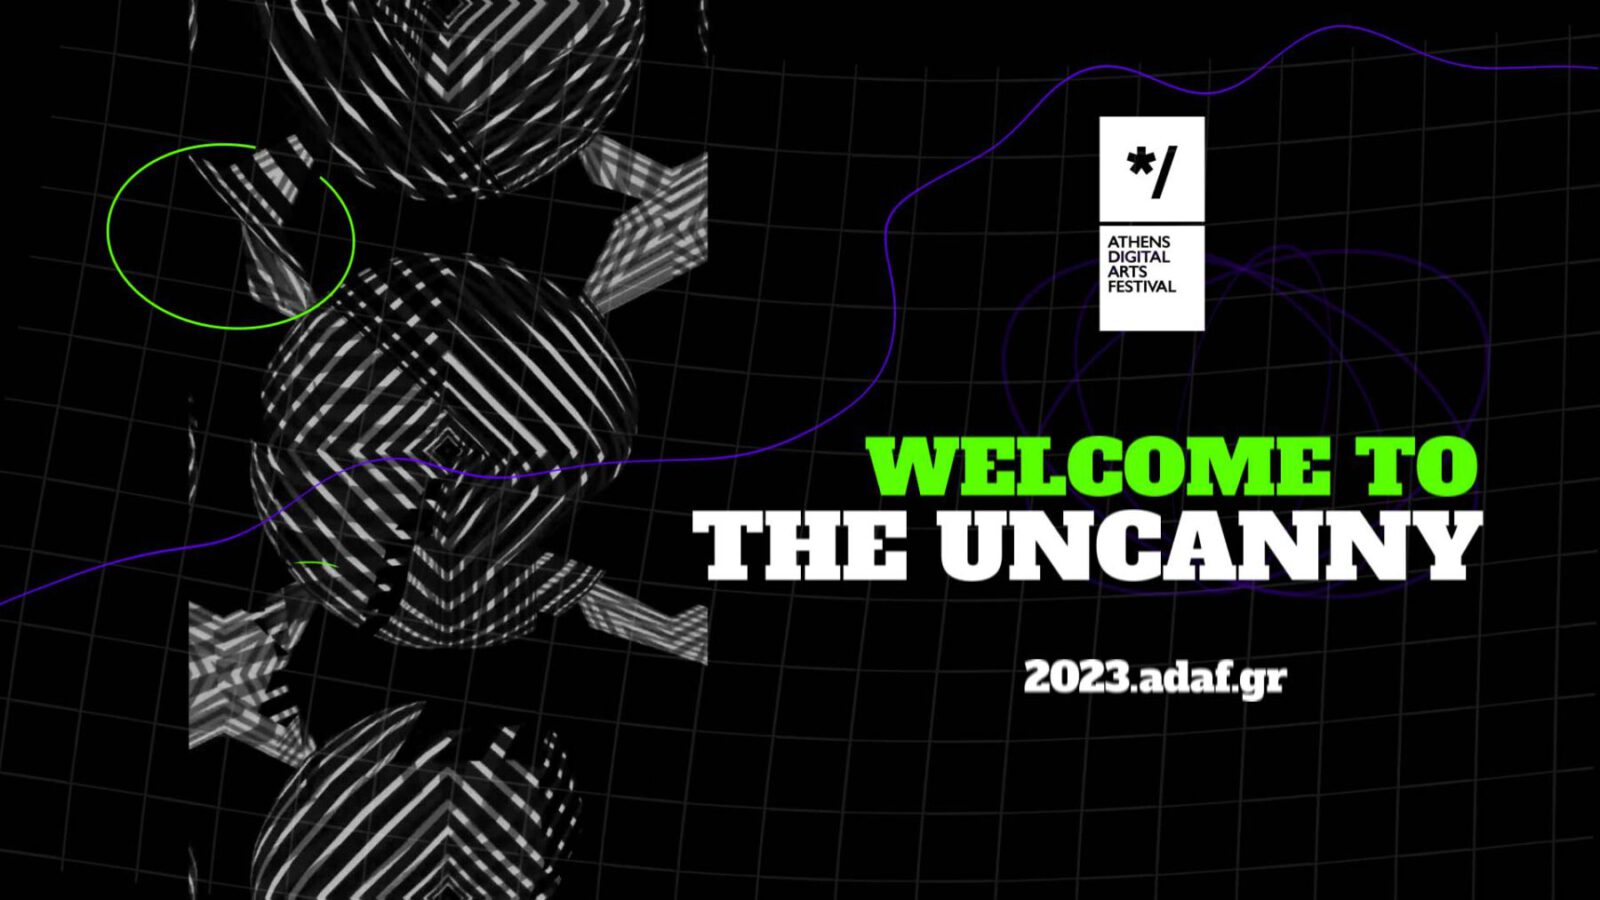 Archisearch 19ο Athens Digital Arts Festival | Welcome to the Uncanny